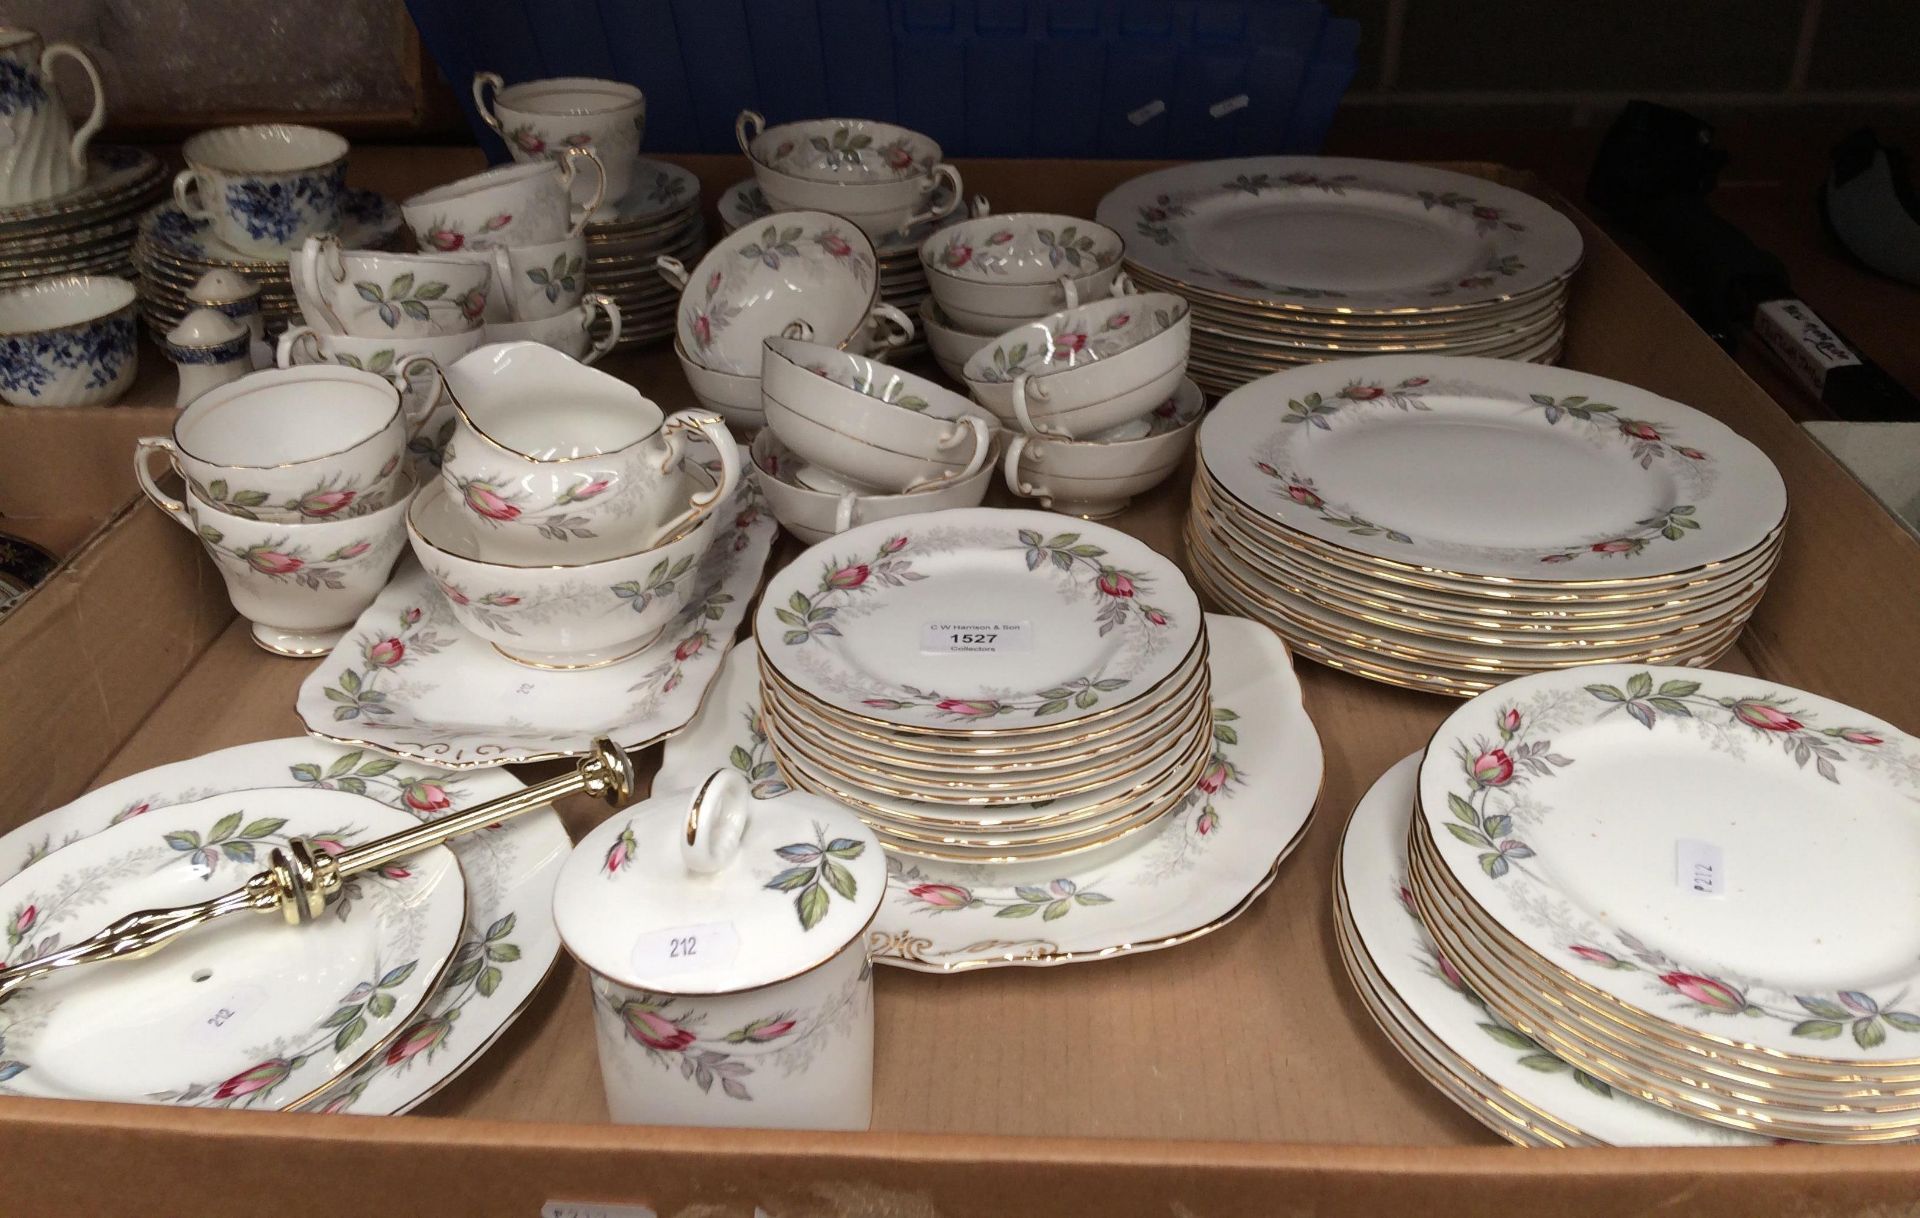 Approximately eighty pieces Paragon Bridal Rose dinner and tea service